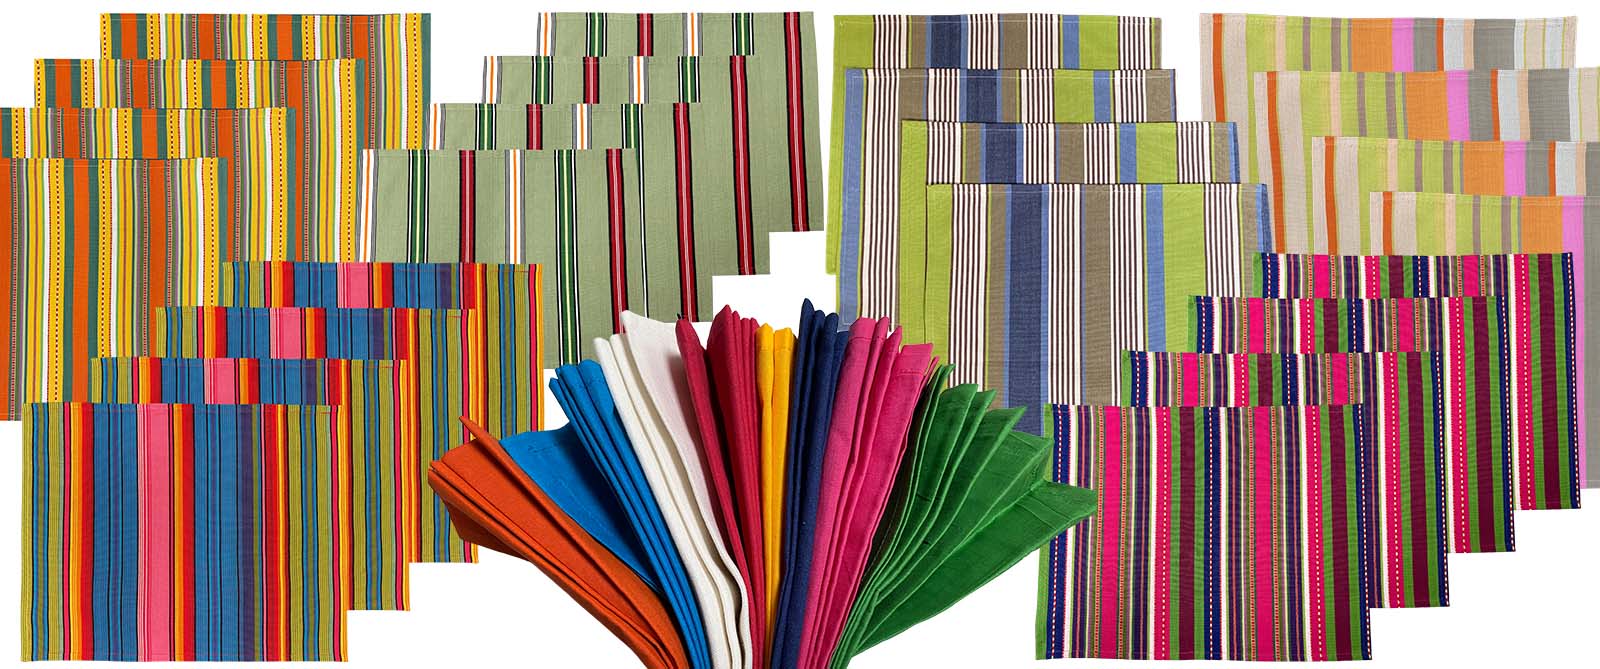 Striped Place Mats - Colourful Table Mats set of 4